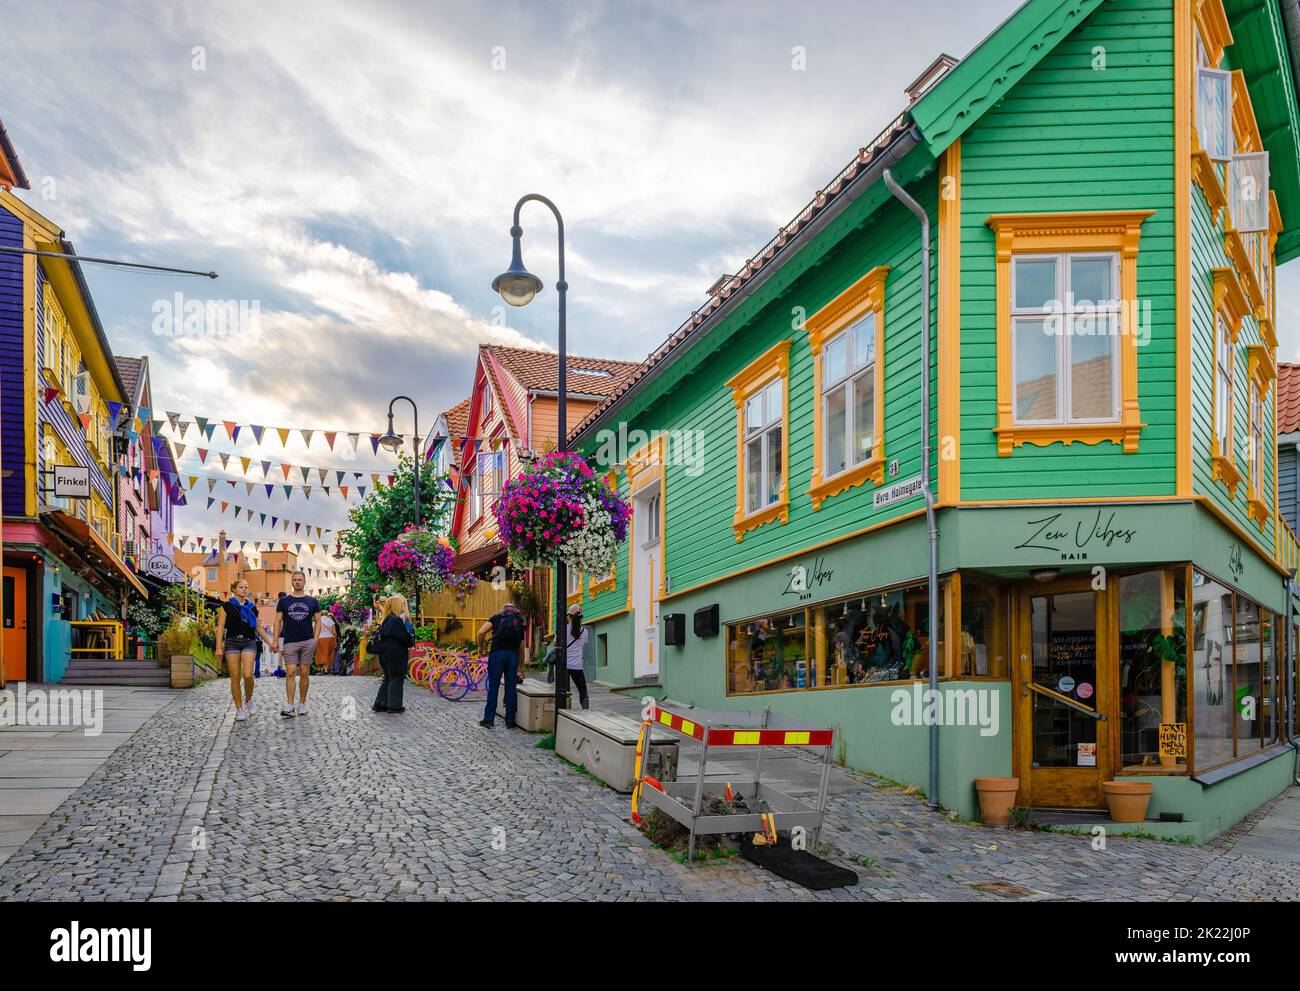 Fargegaten (Street of Colours), the famous colourful pedestrian street with shops and plenty of places for coffee and drinks in Stavanger, Norway. Stock Photo